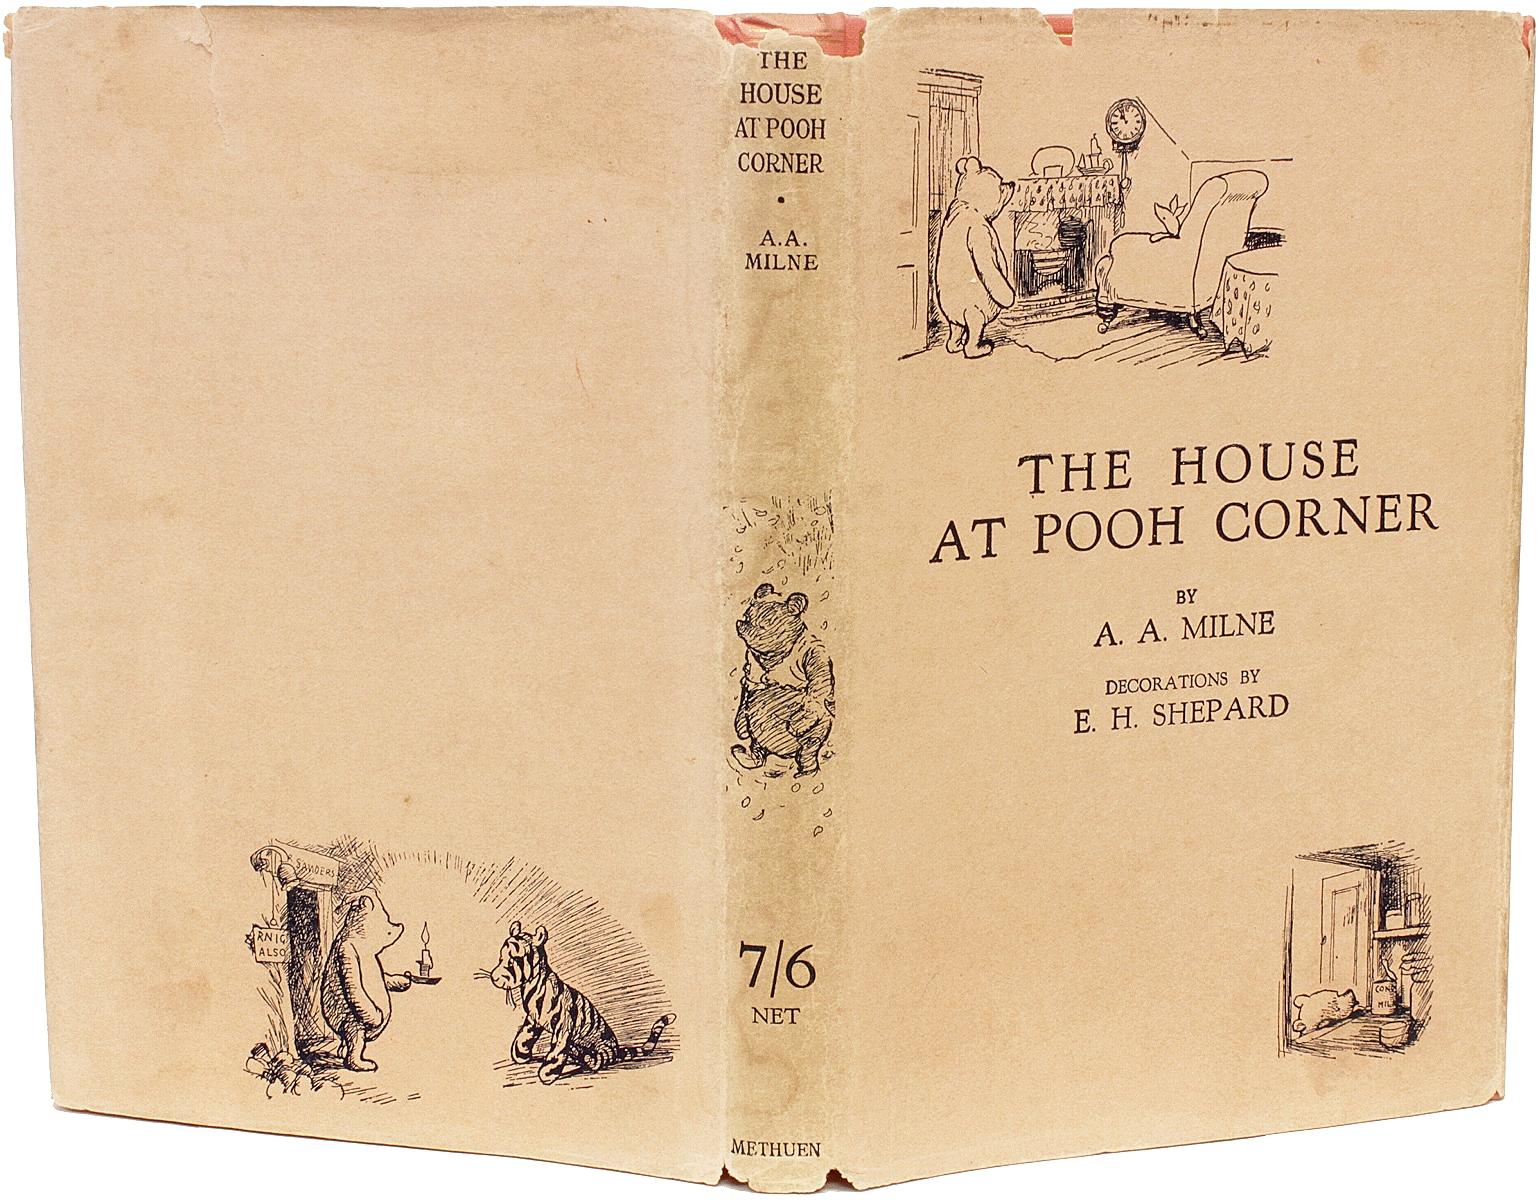 AUTHOR: MILNE, A. A.. 

TITLE: The House At Pooh Corner.

PUBLISHER: London: Methuen & Co. Ltd., 1928.

DESCRIPTION: FIRST EDITION. 1 volume, illustrated by E. H. Shephard. Bound in the publisher's original gilt stamped pink cloth, top edge